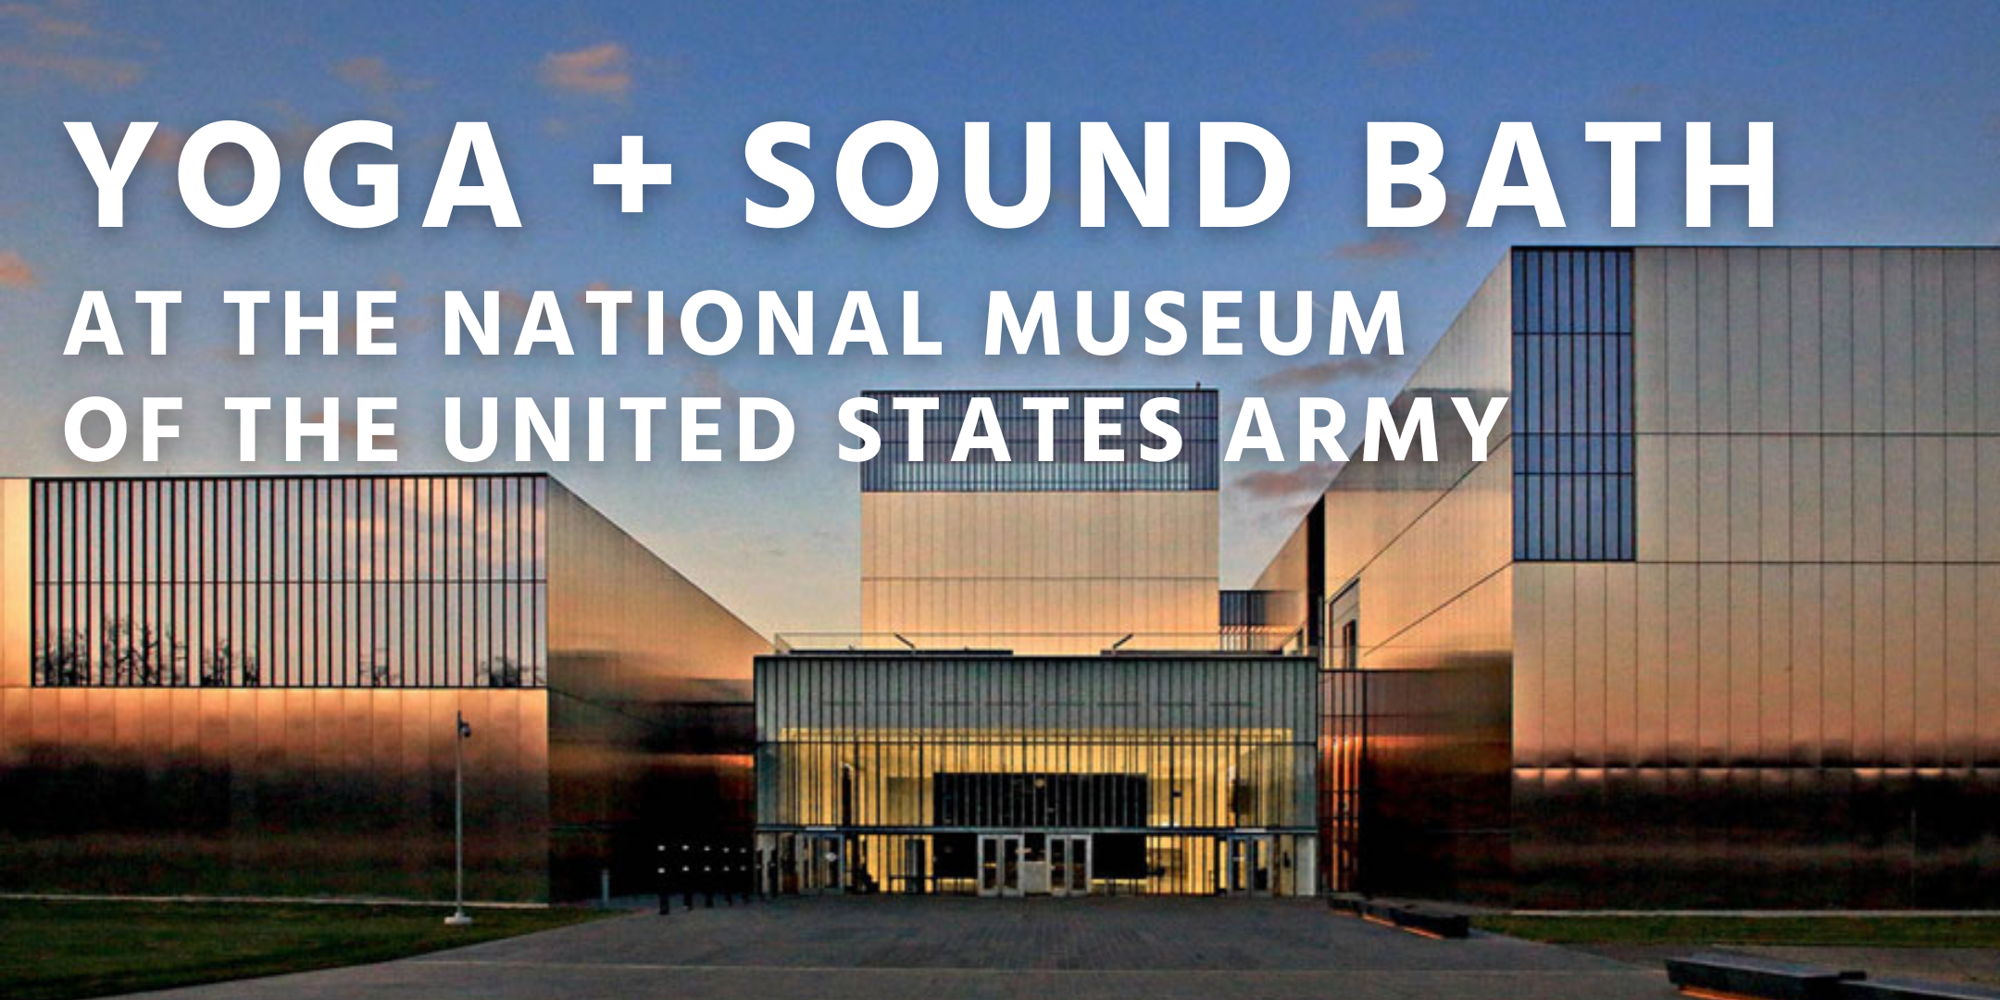 Yoga & Soundbath at the National Museum of the United States Army  hosted by Honest Soul Yoga promotional image